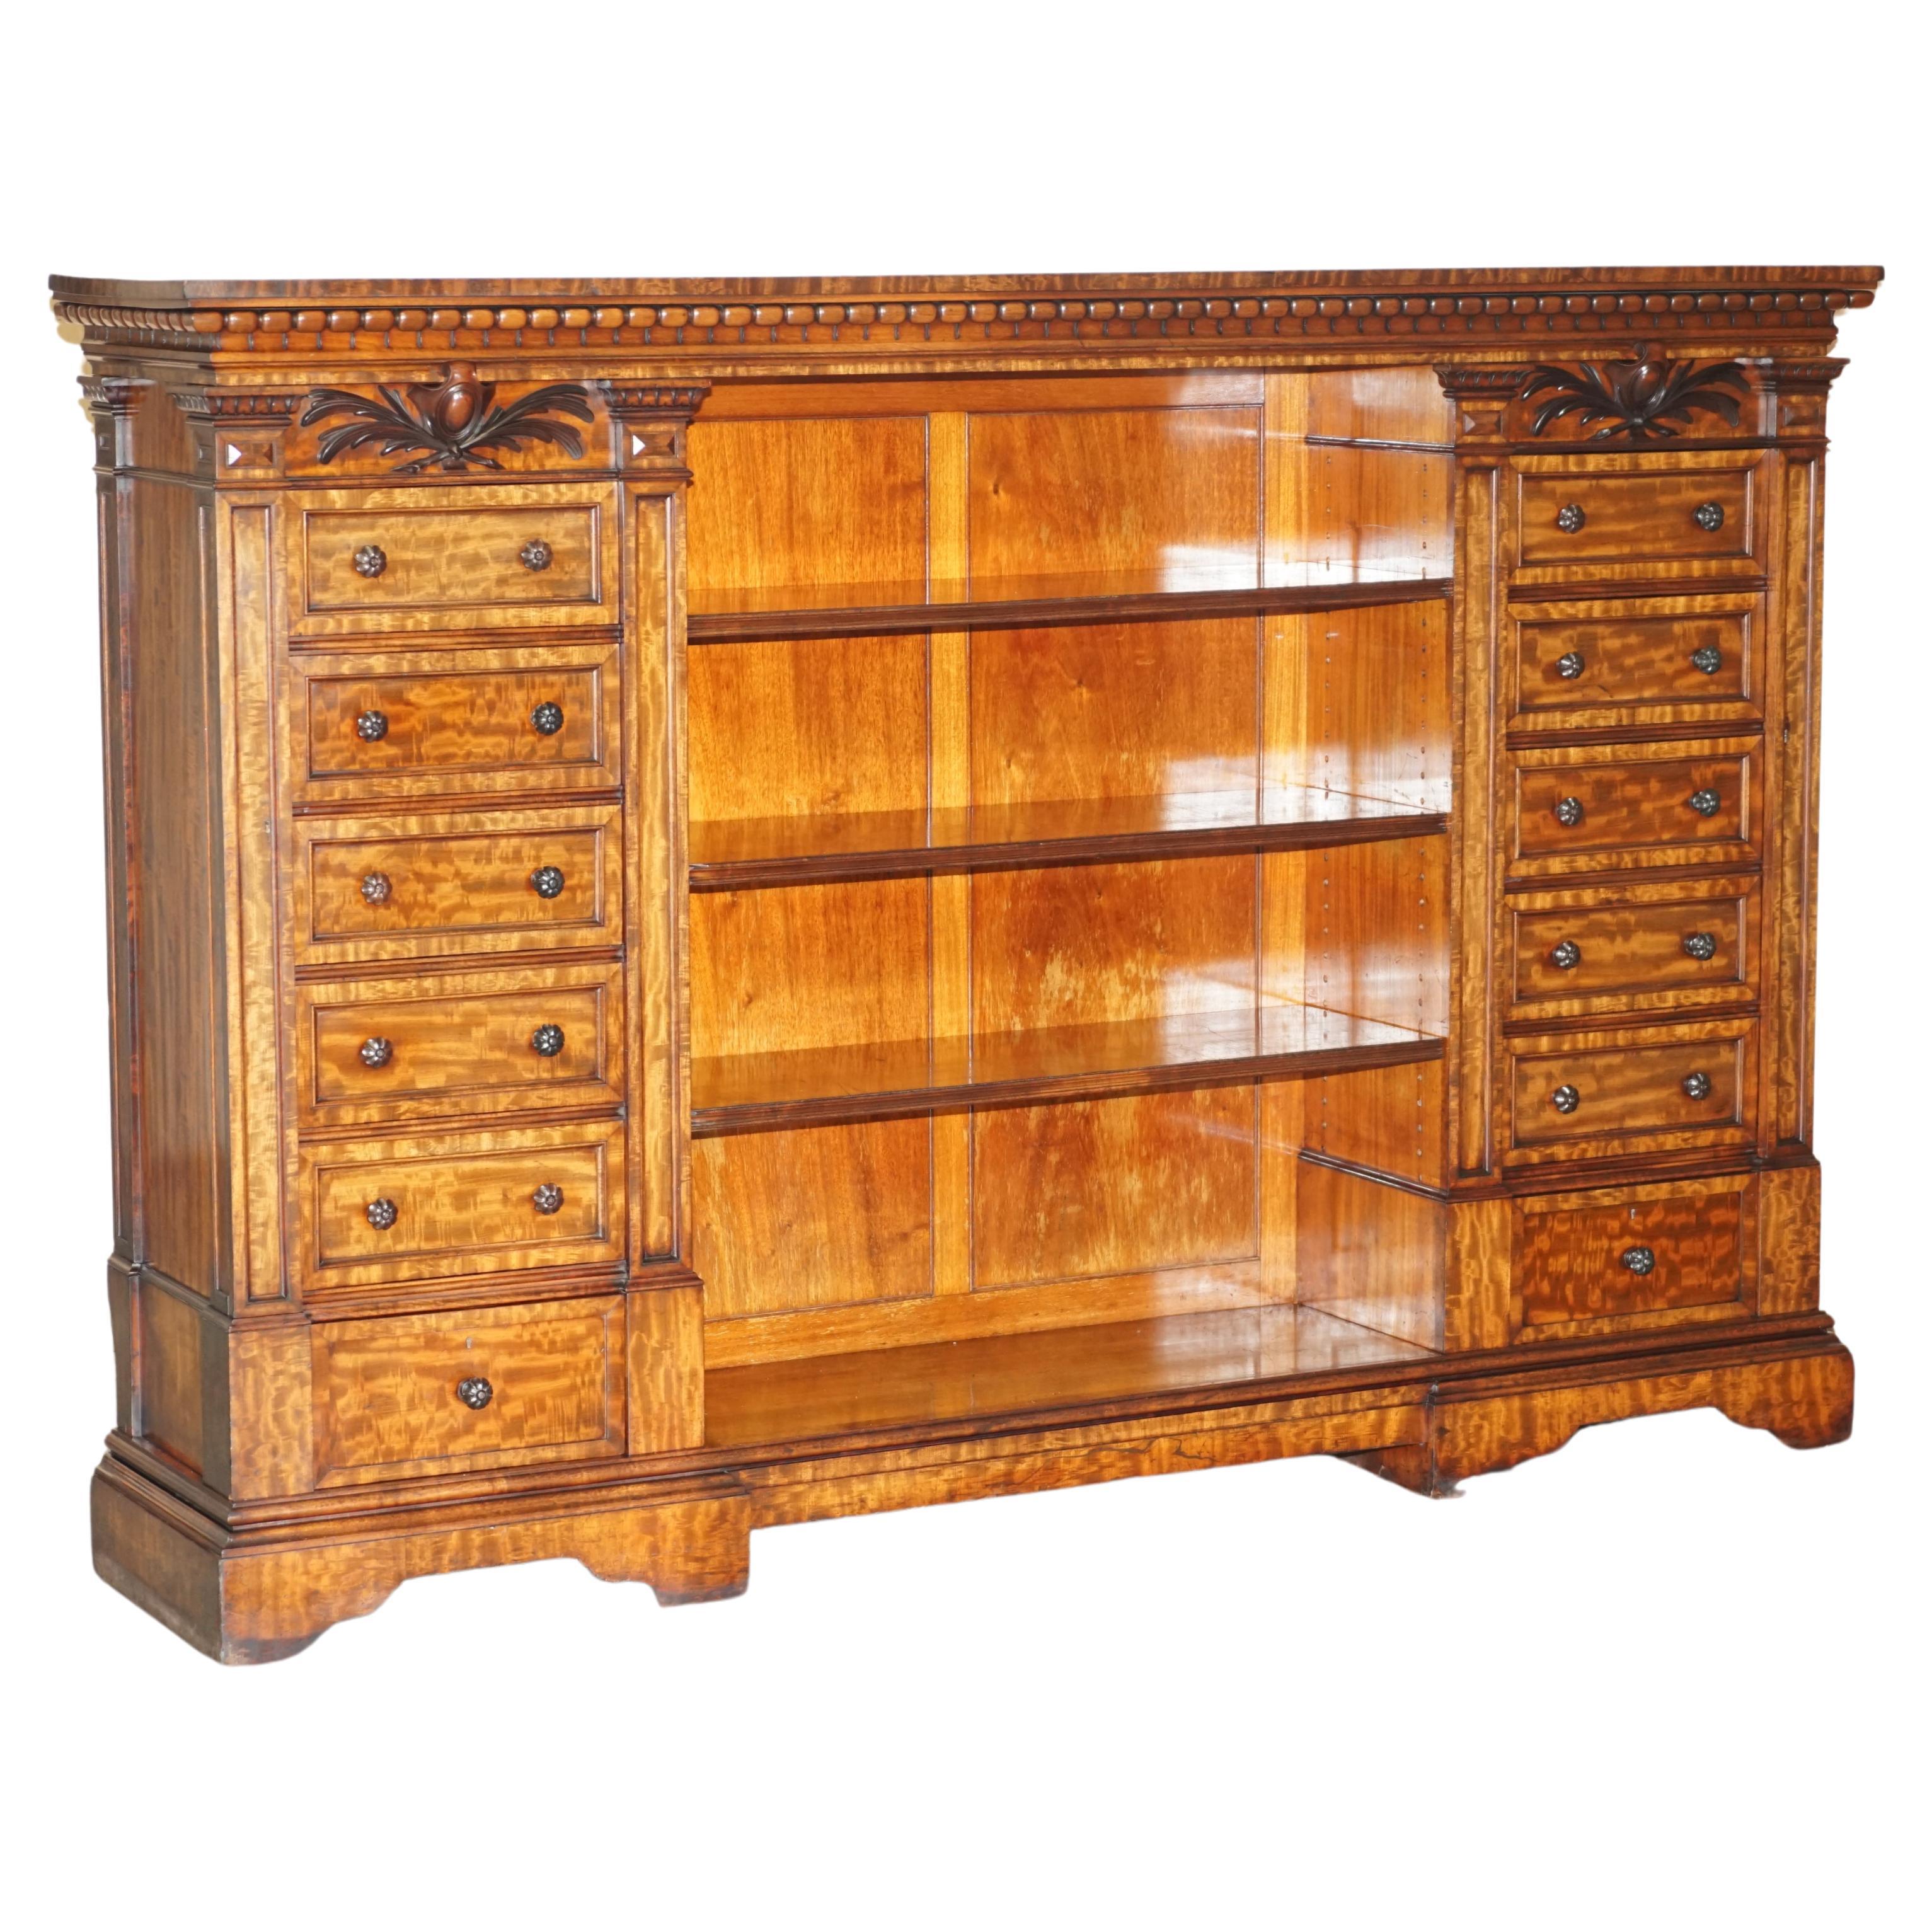 Finest Quality Antique 1830 Flamed Hardwood Wellington Chest of Drawers Bookcase For Sale